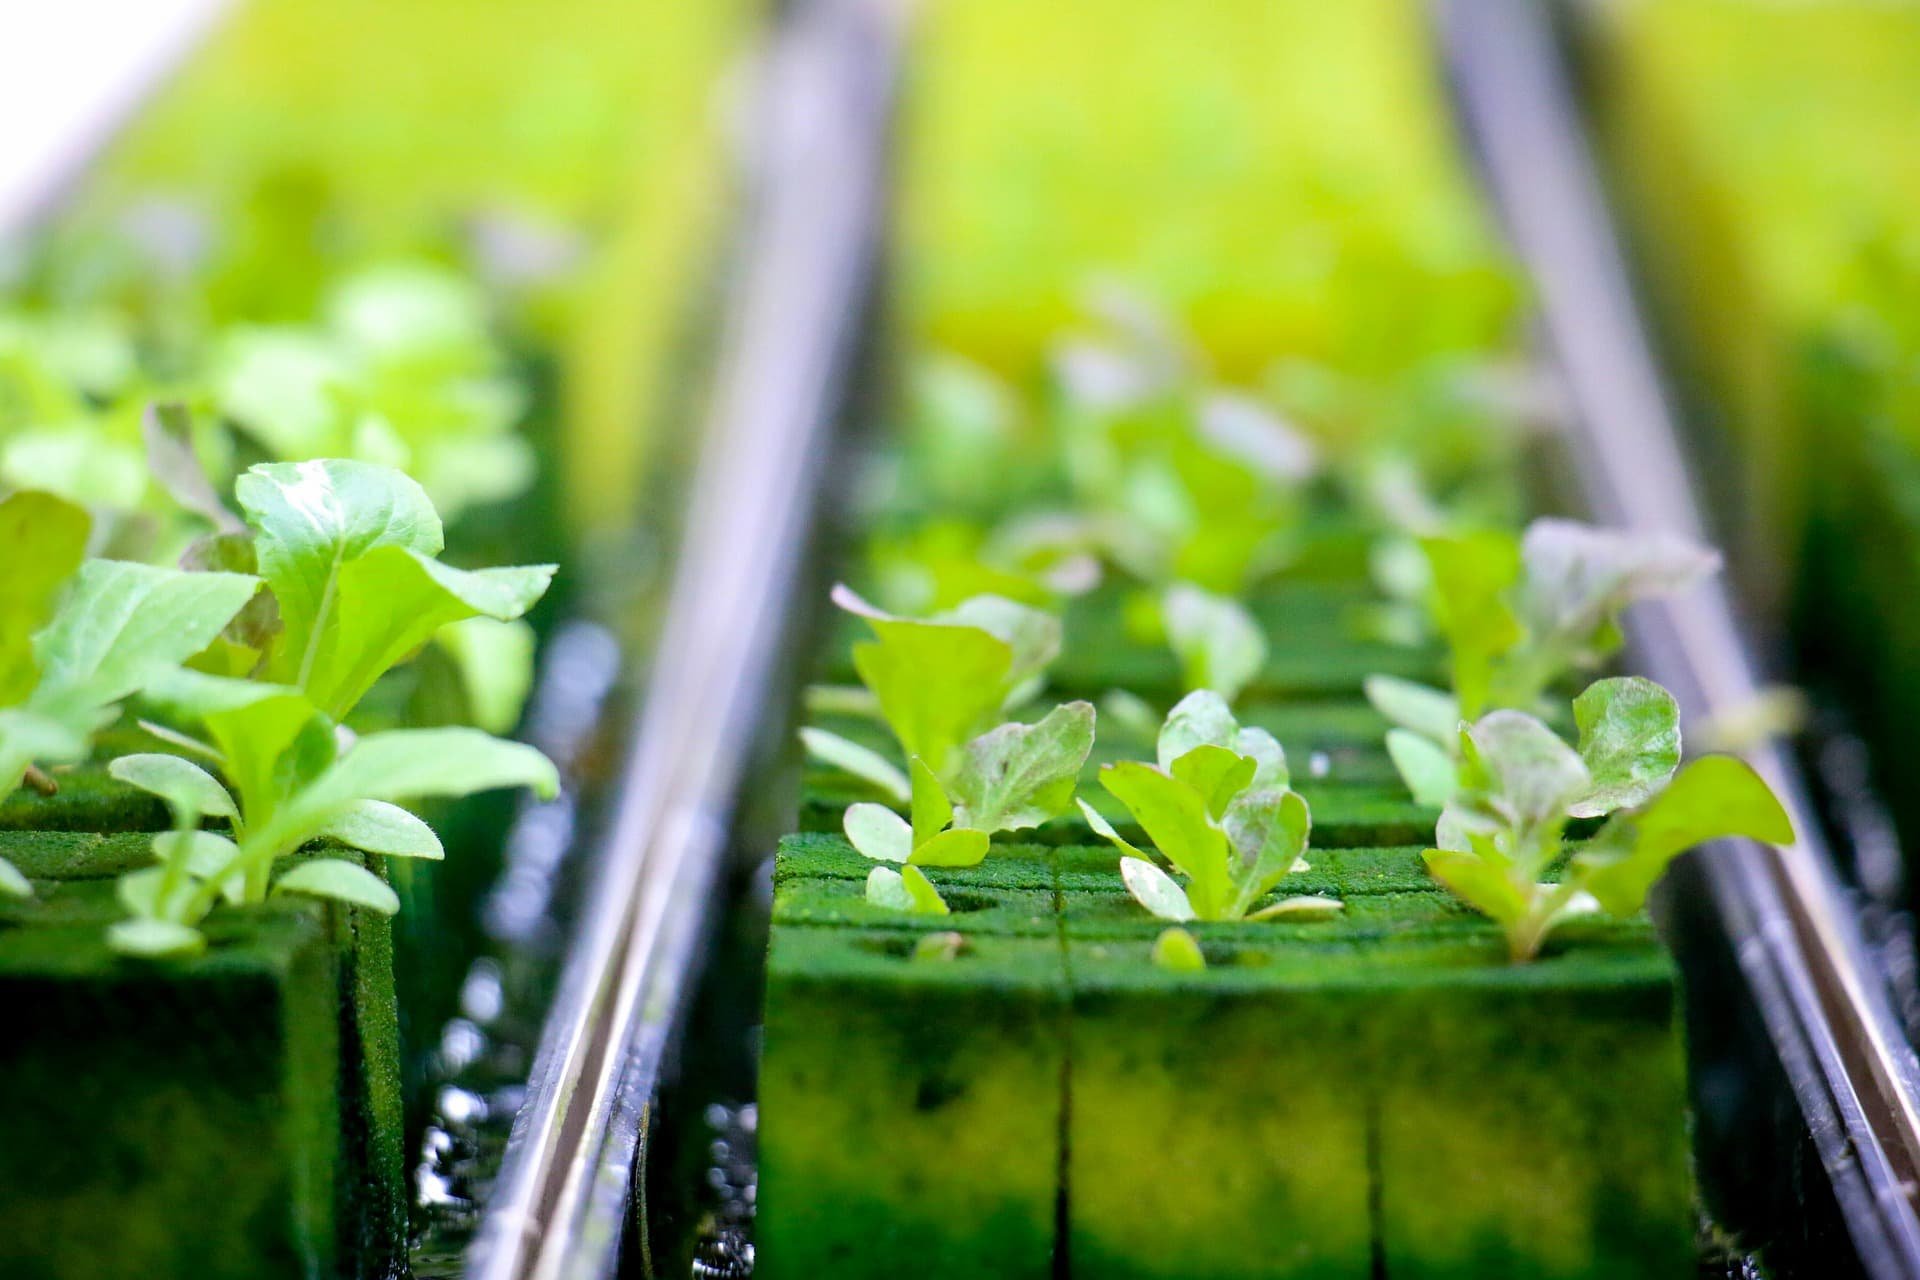 % Learn the Internal Factors Affecting Germination in Rockwool for Hydroponics and how to ensure healthy, viable seeds and increase the germination rate when planting in Rockwool cubes.